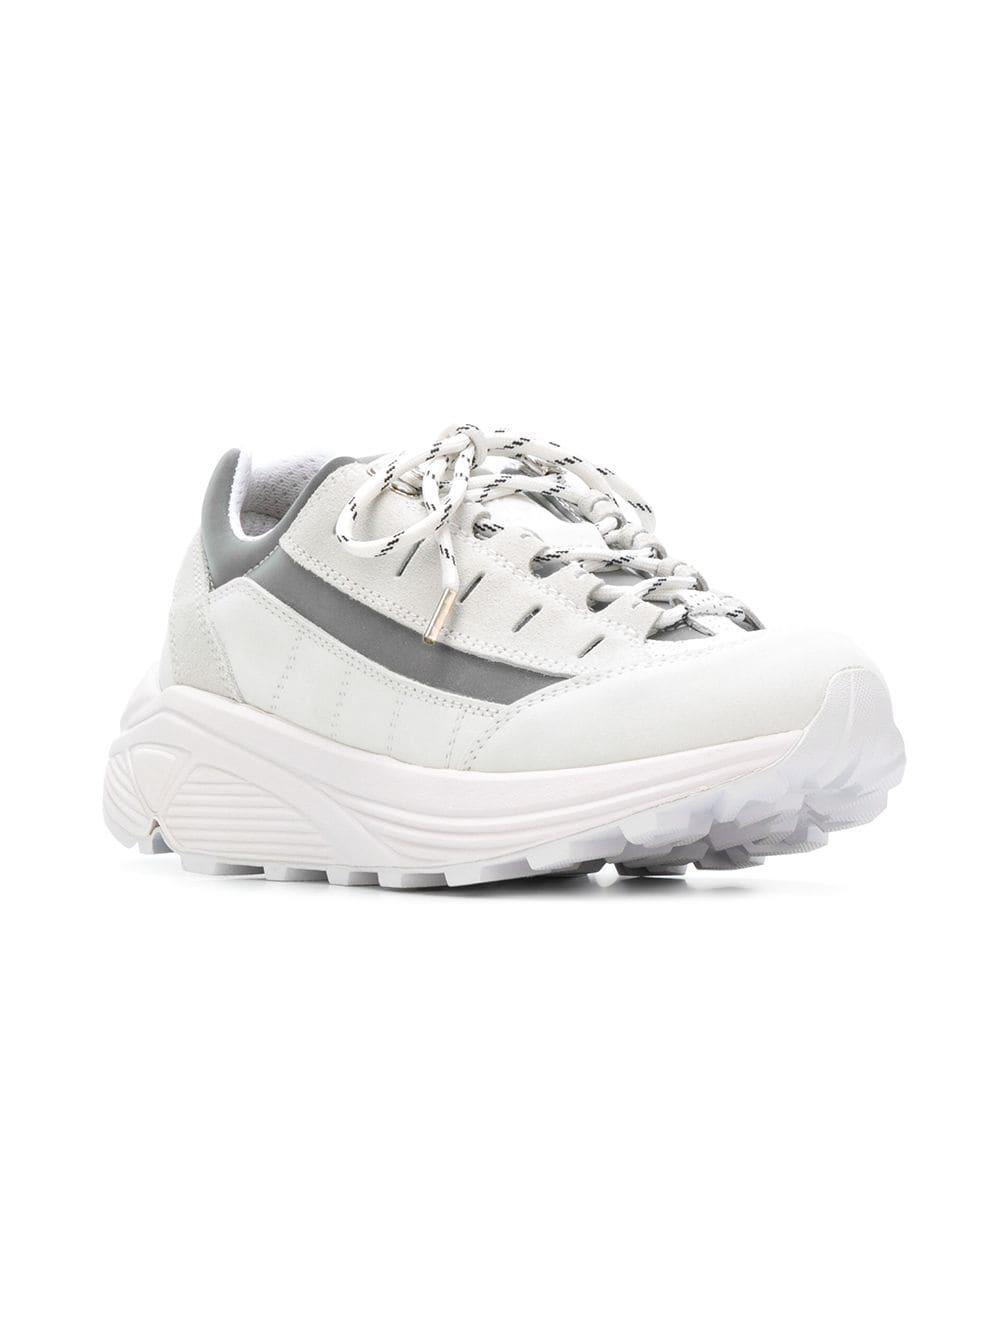 Ganni Synthetic Iris Suede And Leather Sneakers in Bright White (White) -  Lyst